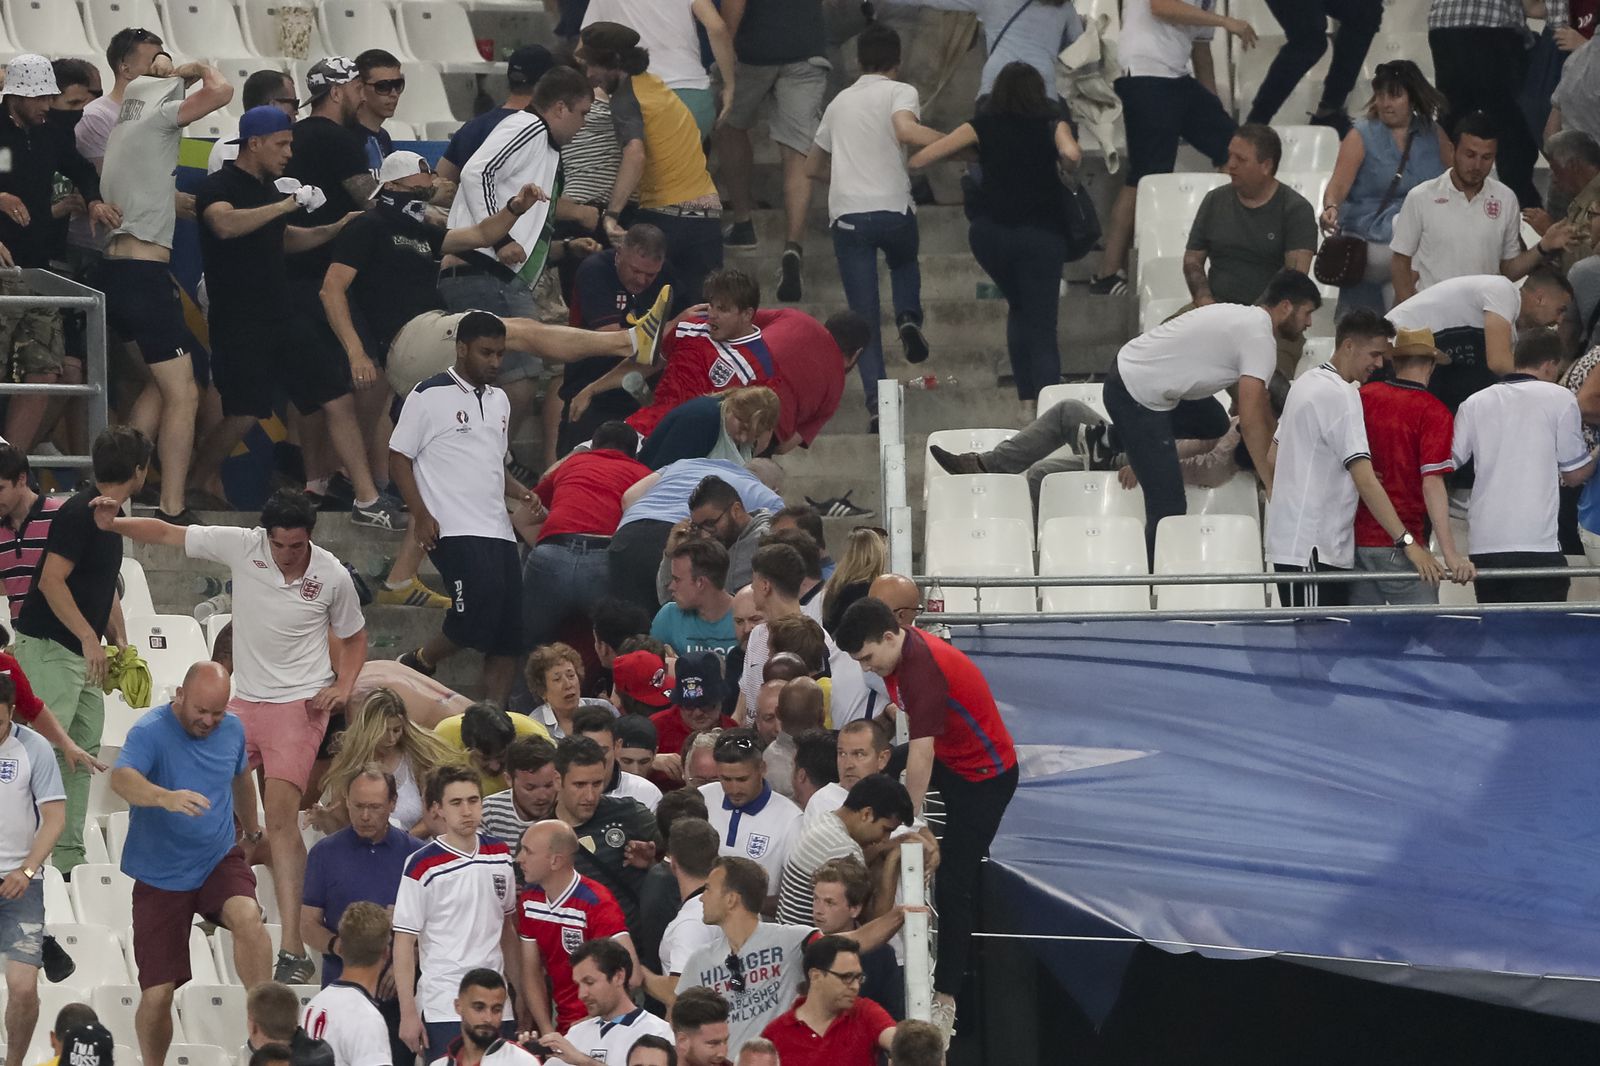 Russia fans attack England fans after the match. I was hesitant to include this as it’s not a ‘favourite’ photo due to the content, but it’s one of the most important I shot this year. (400mm, ISO2500, 1/800th, f2.8)